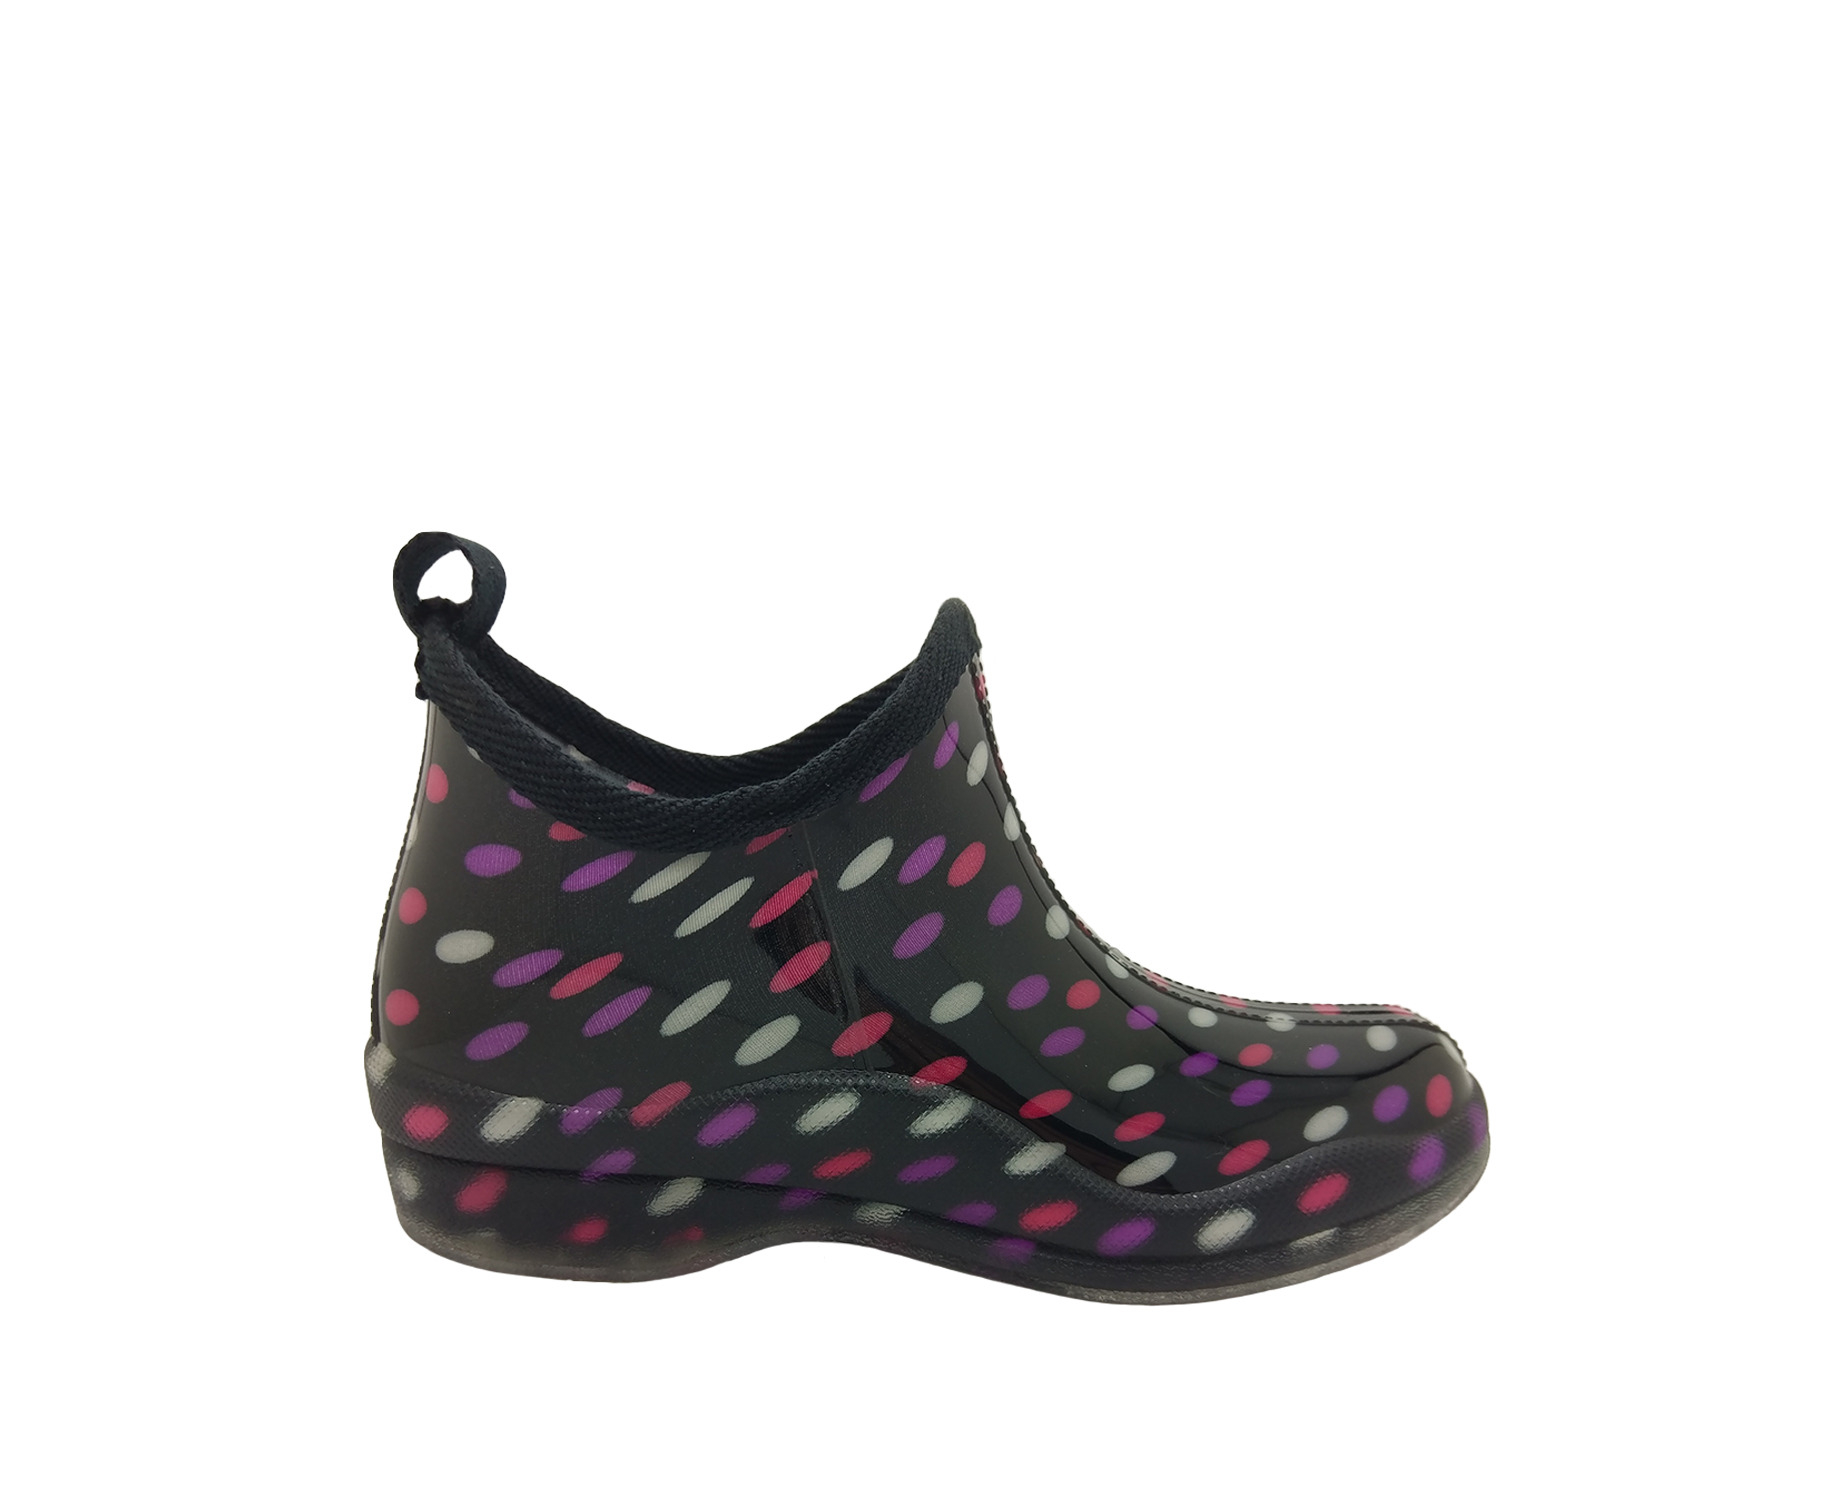 Aussie Gumboot Bella Ankle Boot Rainboot Slip On Patterned Small Sizes ...